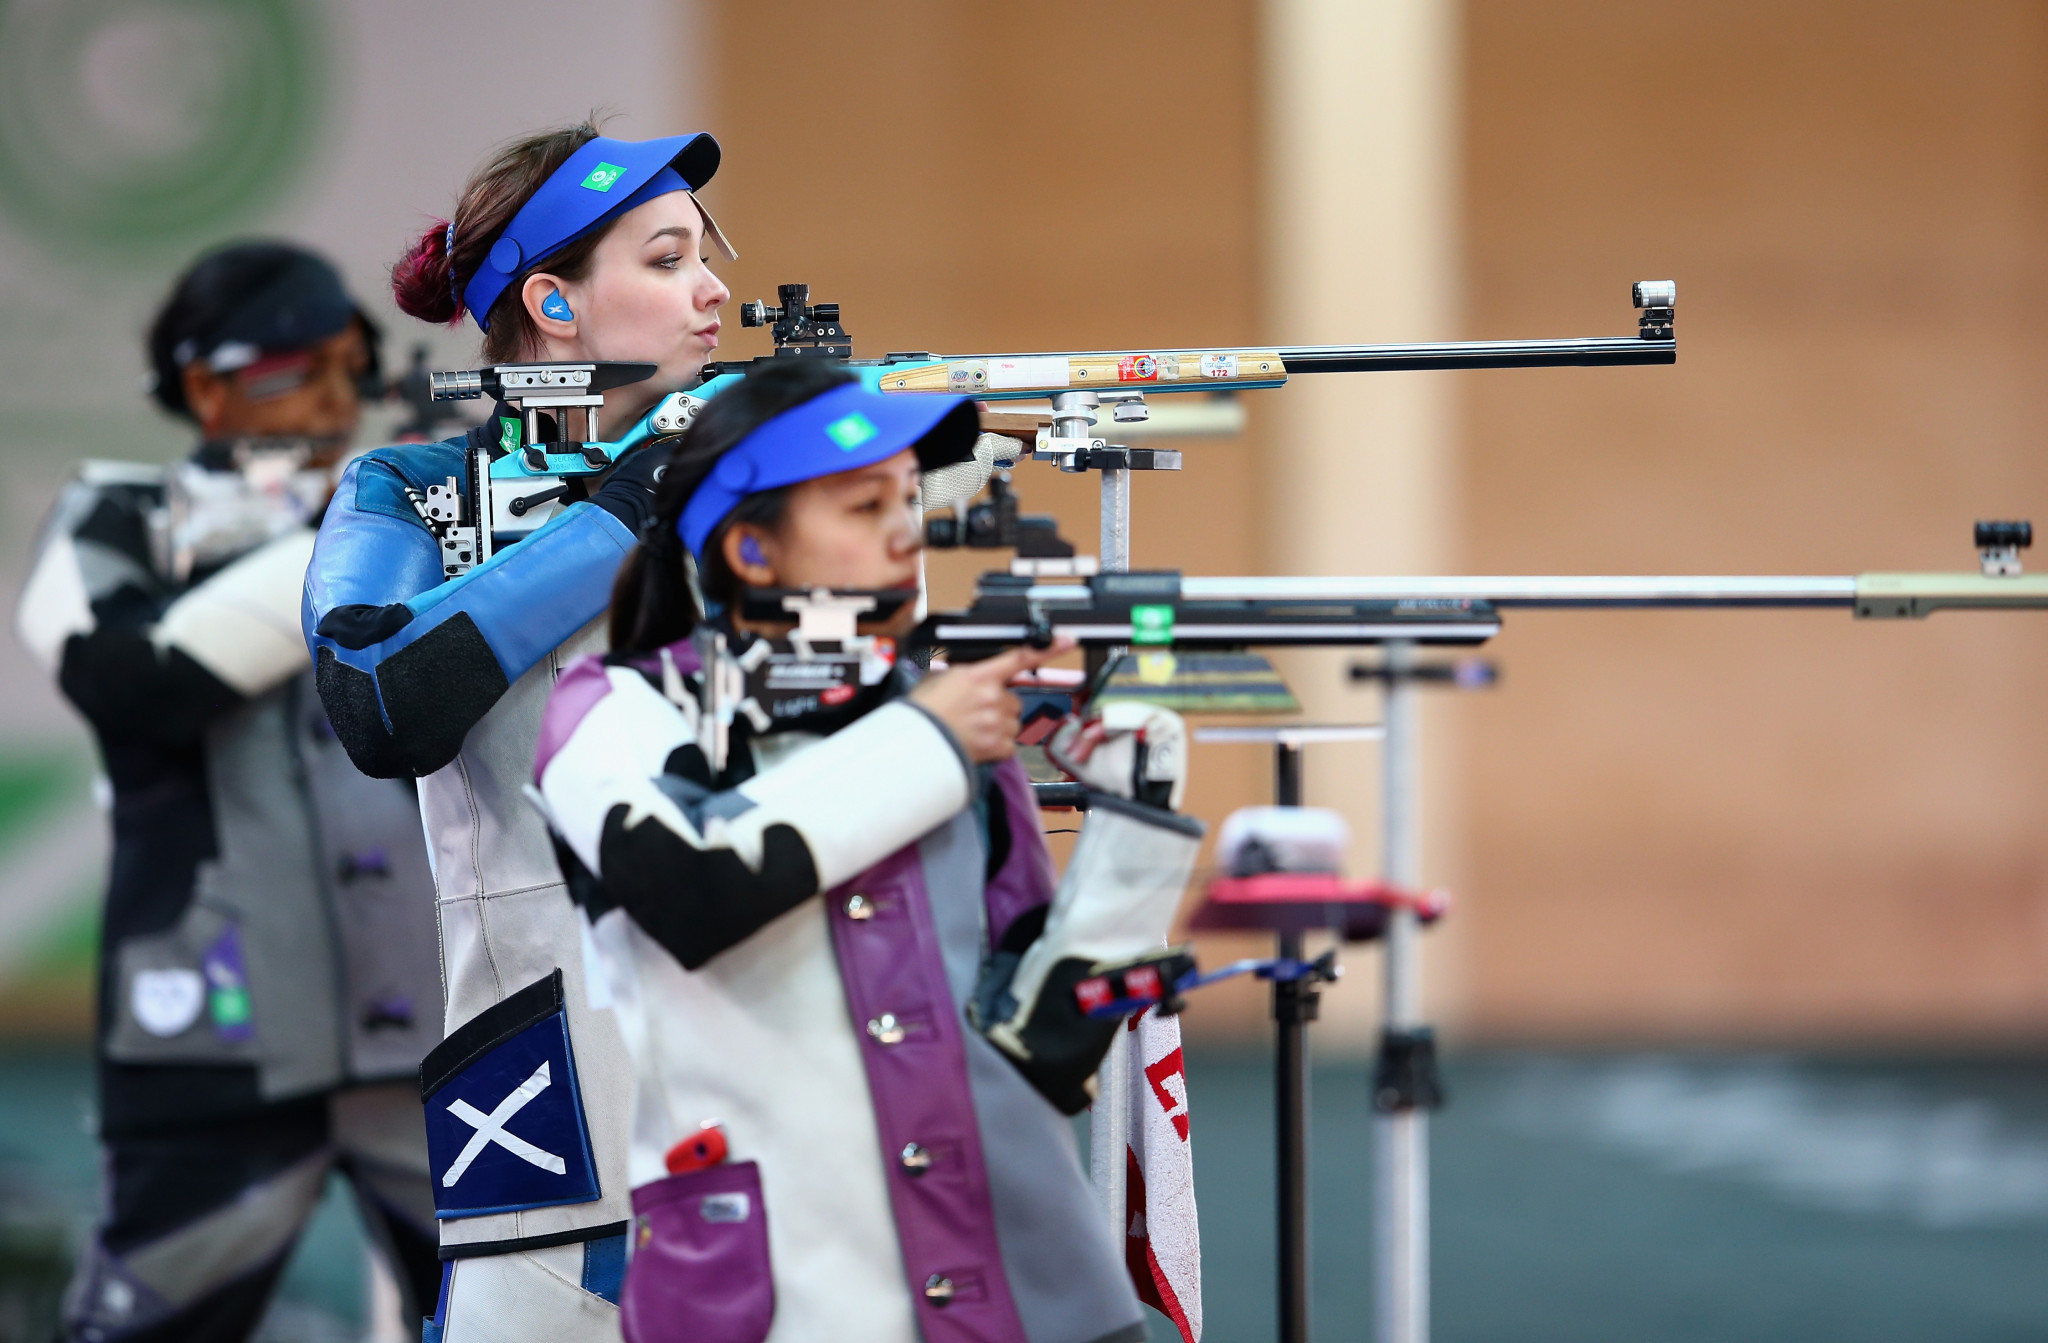 Exclusive: ISSF to lobby Birmingham 2022 and CGF to have shooting restored to programme